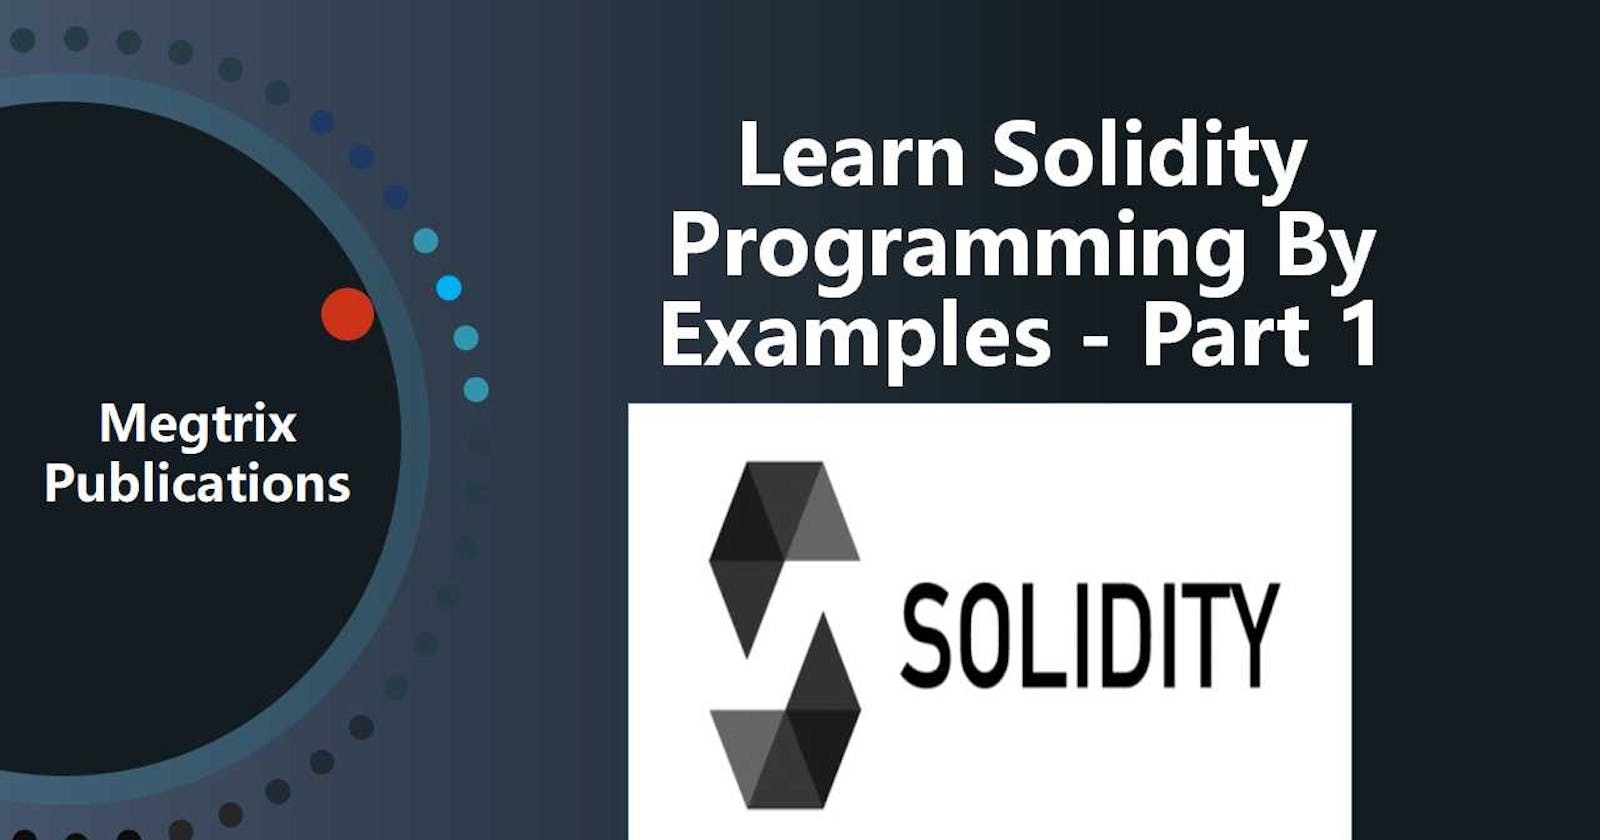 Learn Solidity Programming By Examples - Part 1